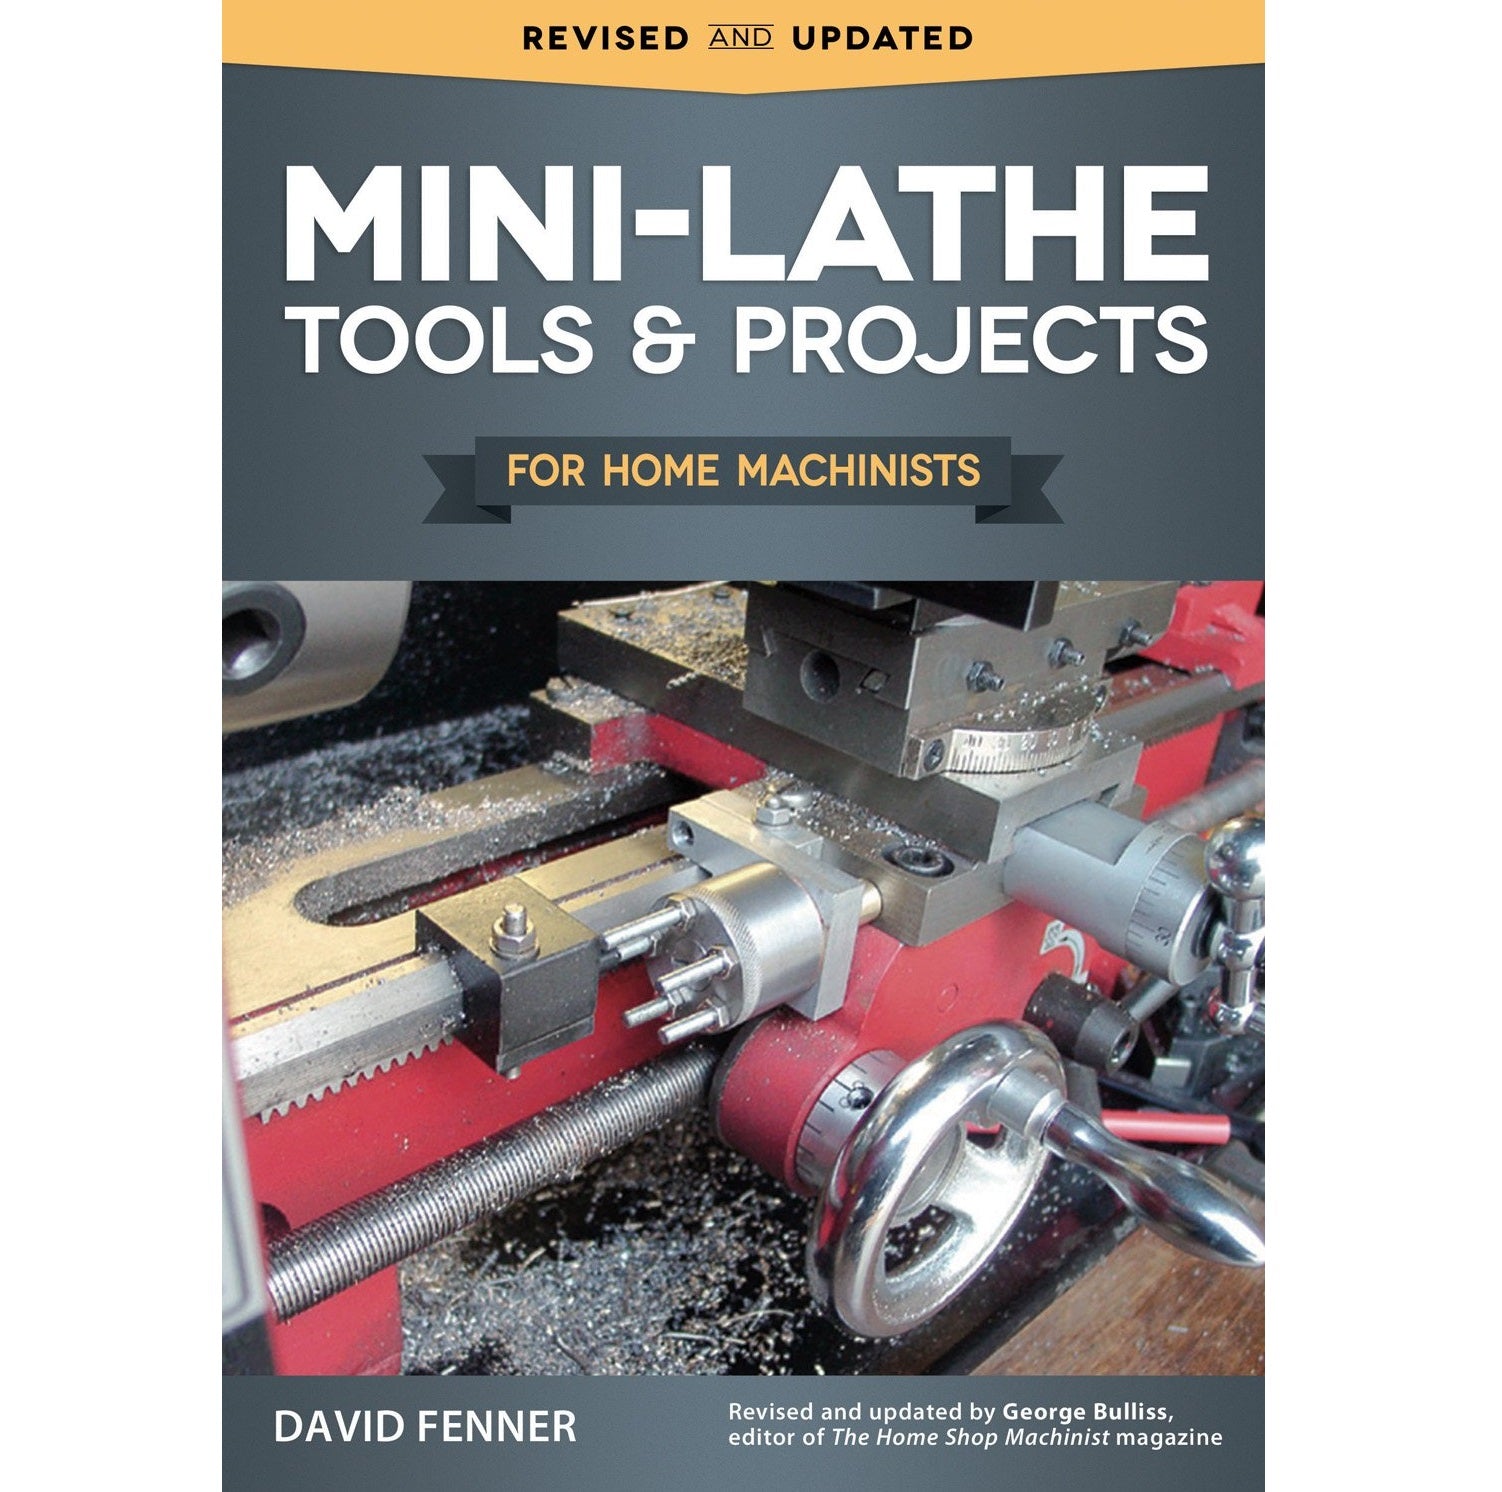 Mini - Lathe Tools and Projects for Home Machinists Book, by David Fenner